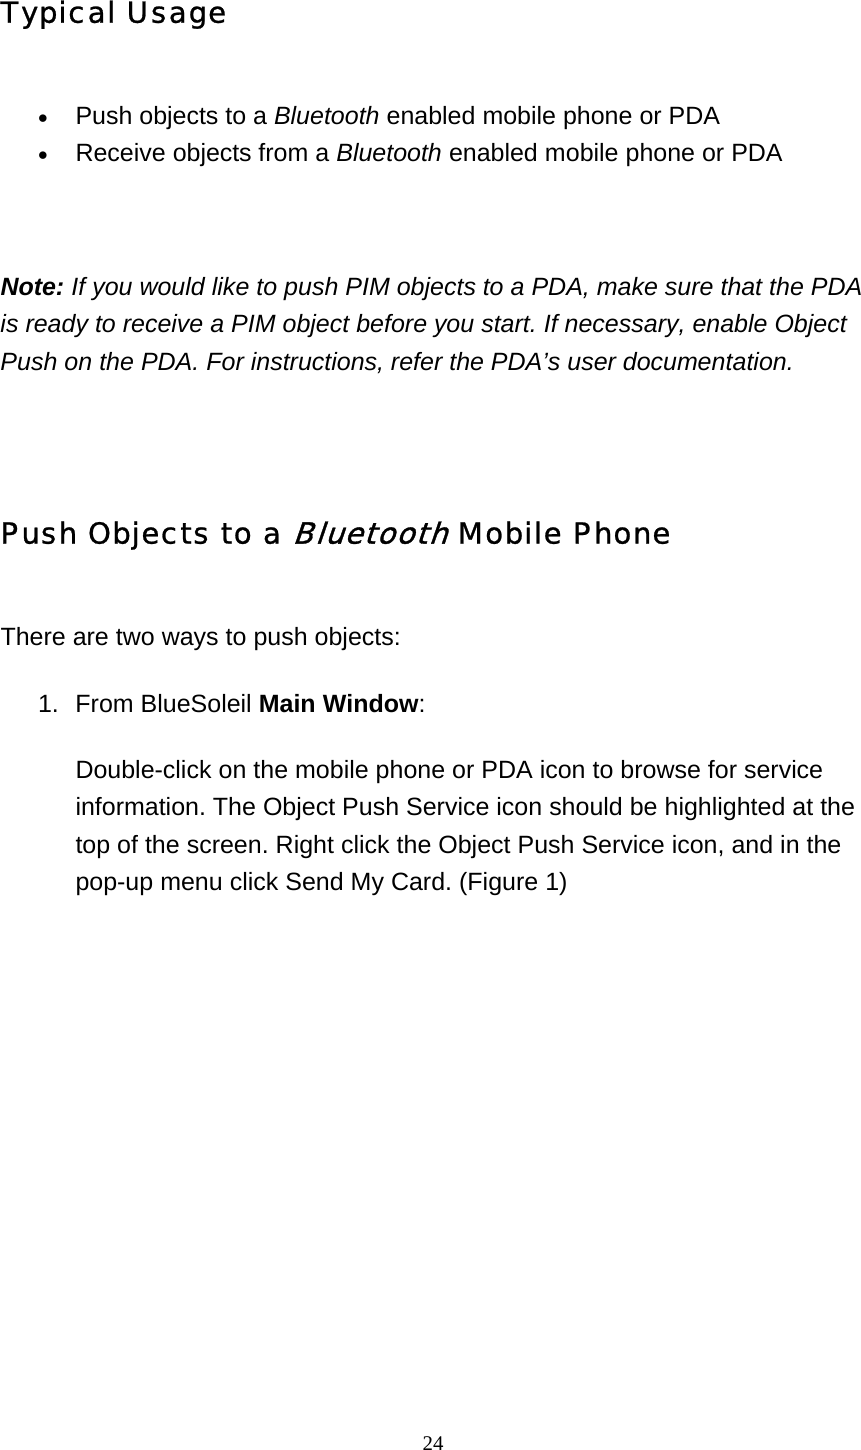   24Typical Usage • Push objects to a Bluetooth enabled mobile phone or PDA   • Receive objects from a Bluetooth enabled mobile phone or PDA     Note: If you would like to push PIM objects to a PDA, make sure that the PDA is ready to receive a PIM object before you start. If necessary, enable Object Push on the PDA. For instructions, refer the PDA’s user documentation.   Push Objects to a Bluetooth Mobile Phone There are two ways to push objects: 1. From BlueSoleil Main Window:  Double-click on the mobile phone or PDA icon to browse for service information. The Object Push Service icon should be highlighted at the top of the screen. Right click the Object Push Service icon, and in the pop-up menu click Send My Card. (Figure 1)   